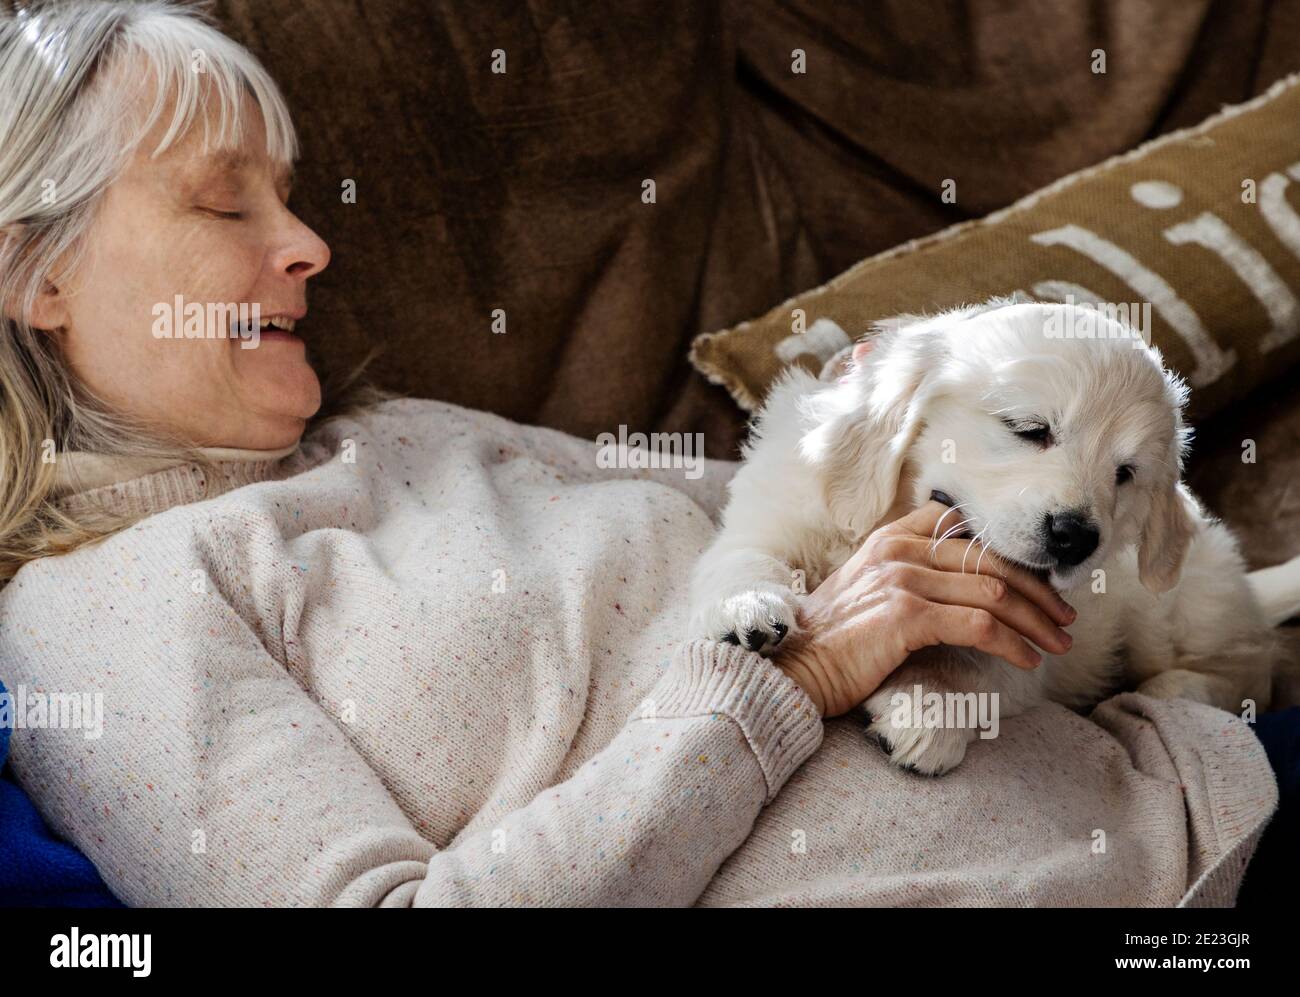 Woman holding seven week old Platinum, or Cream colored Golden Retriever puppy. Stock Photo